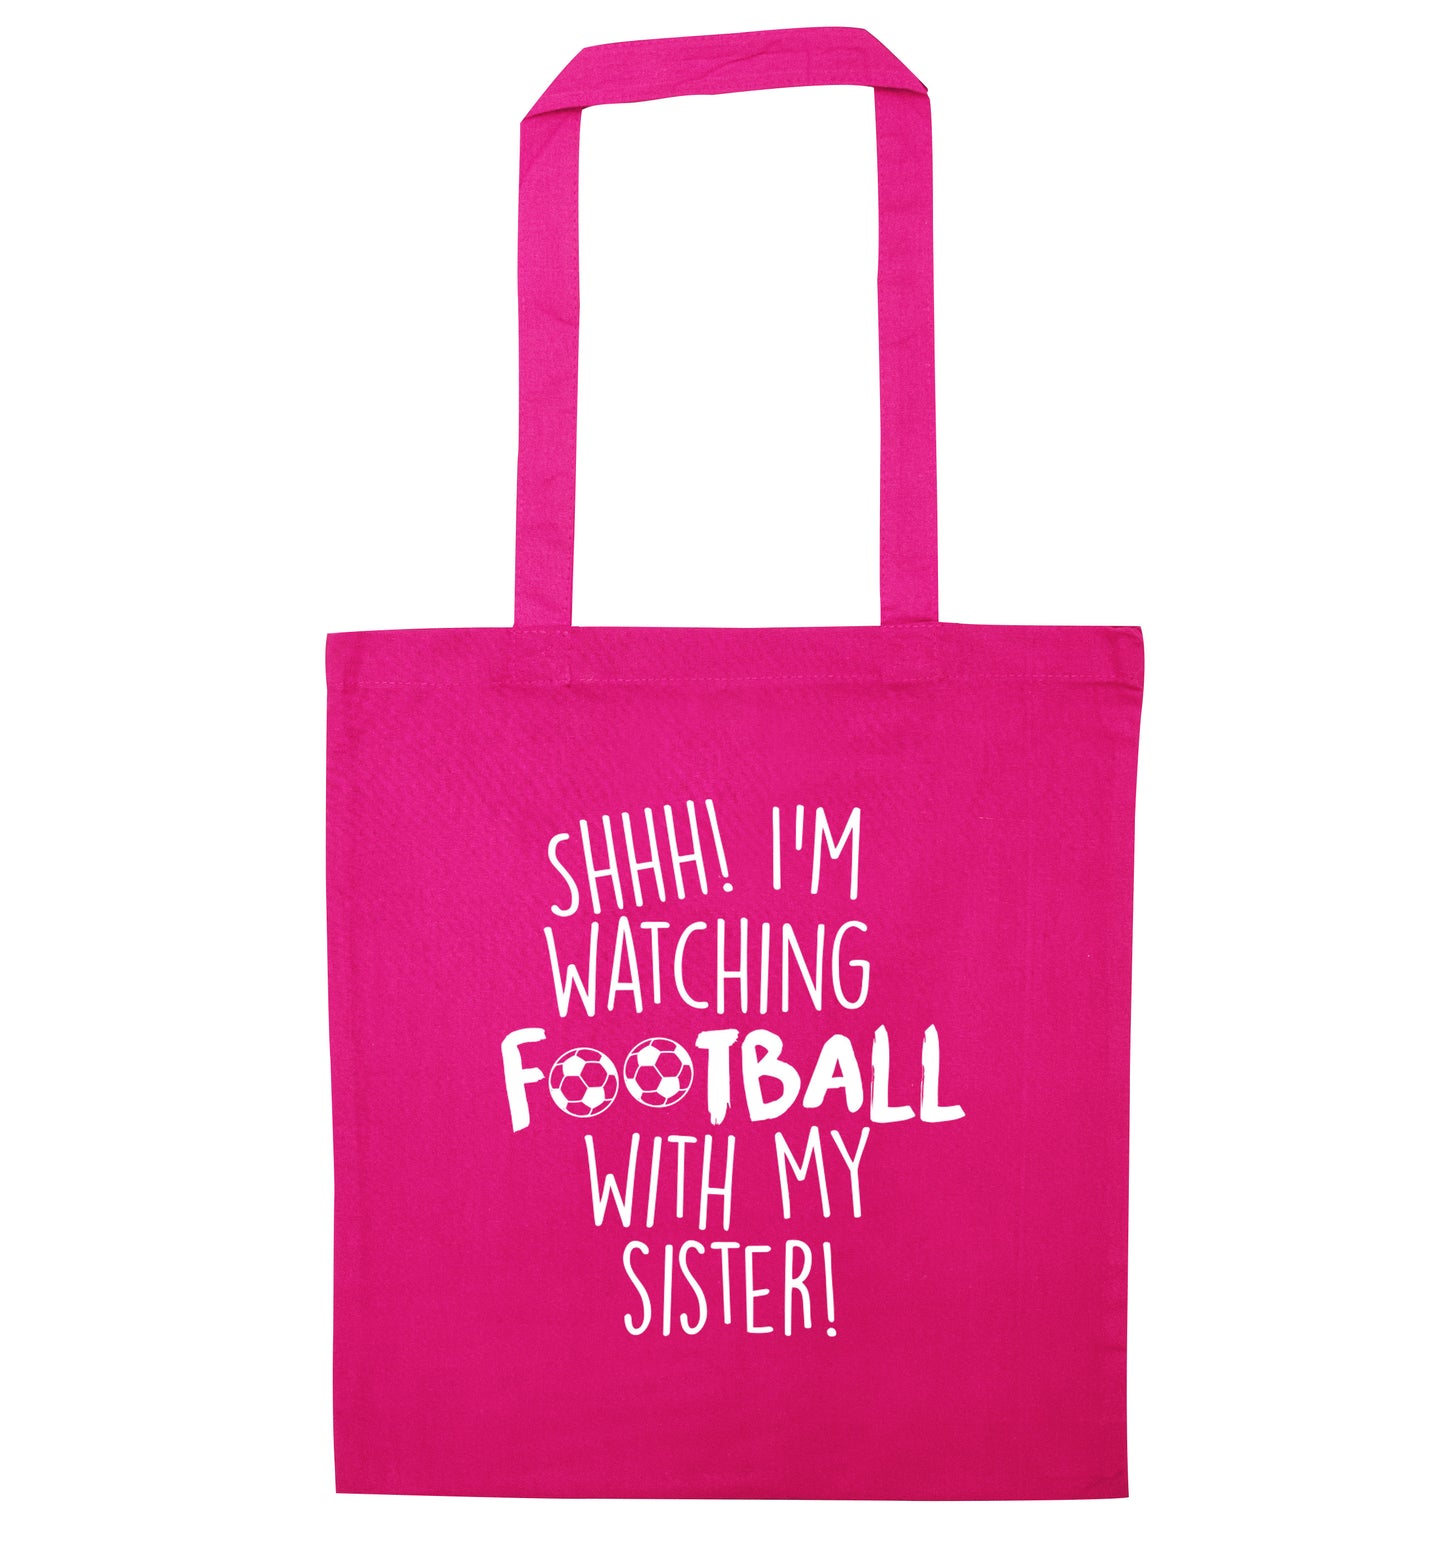 Shhh I'm watching football with my sister pink tote bag